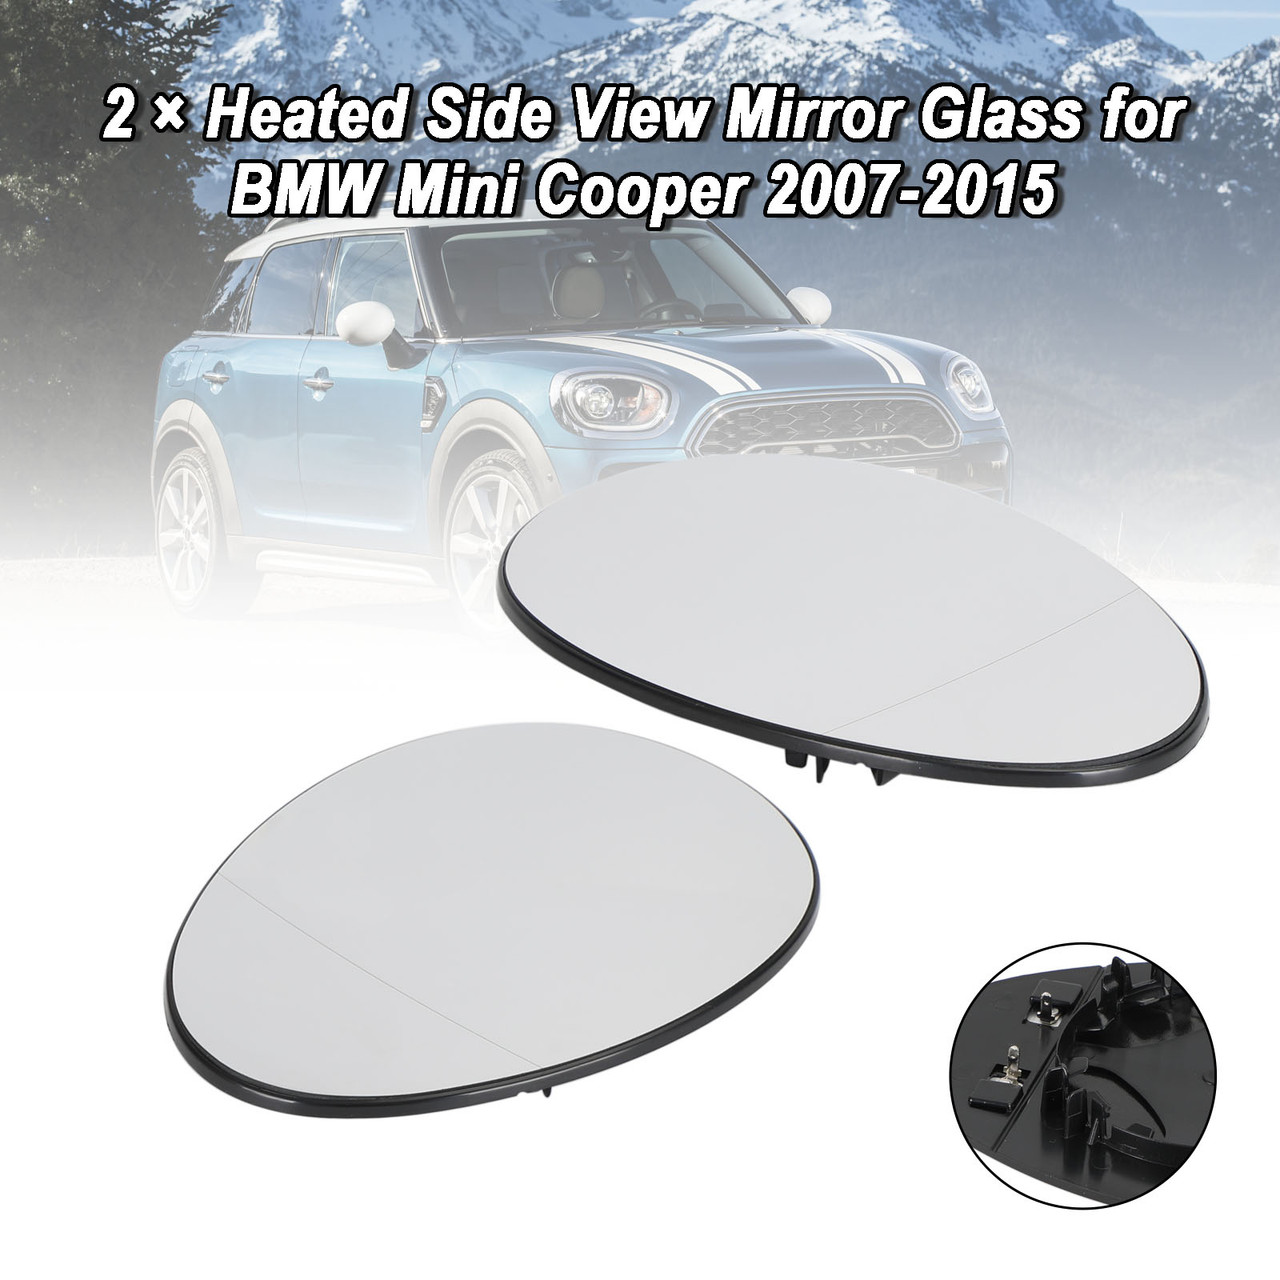 2 X Heated Side View Mirror Glass for BMW Mini Cooper 2007-2015